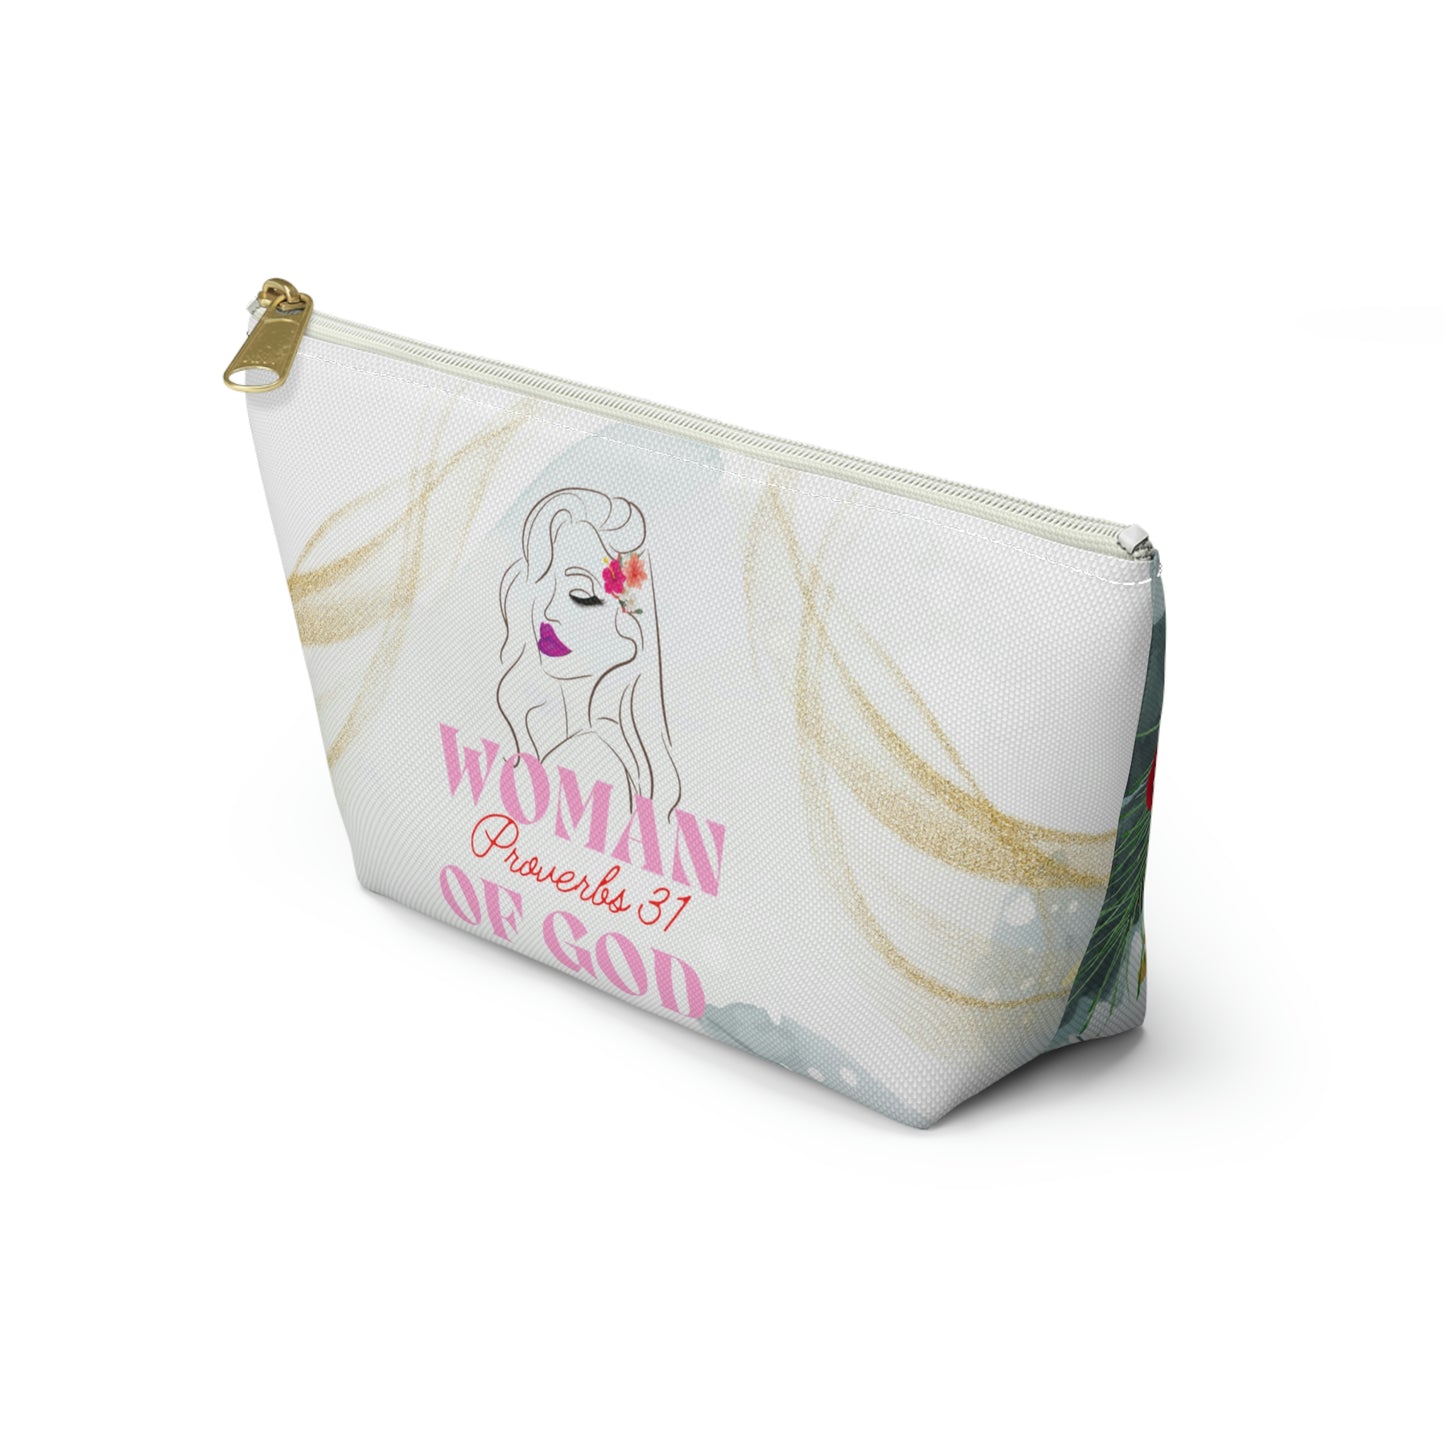 Woman of God Cosmetic Case